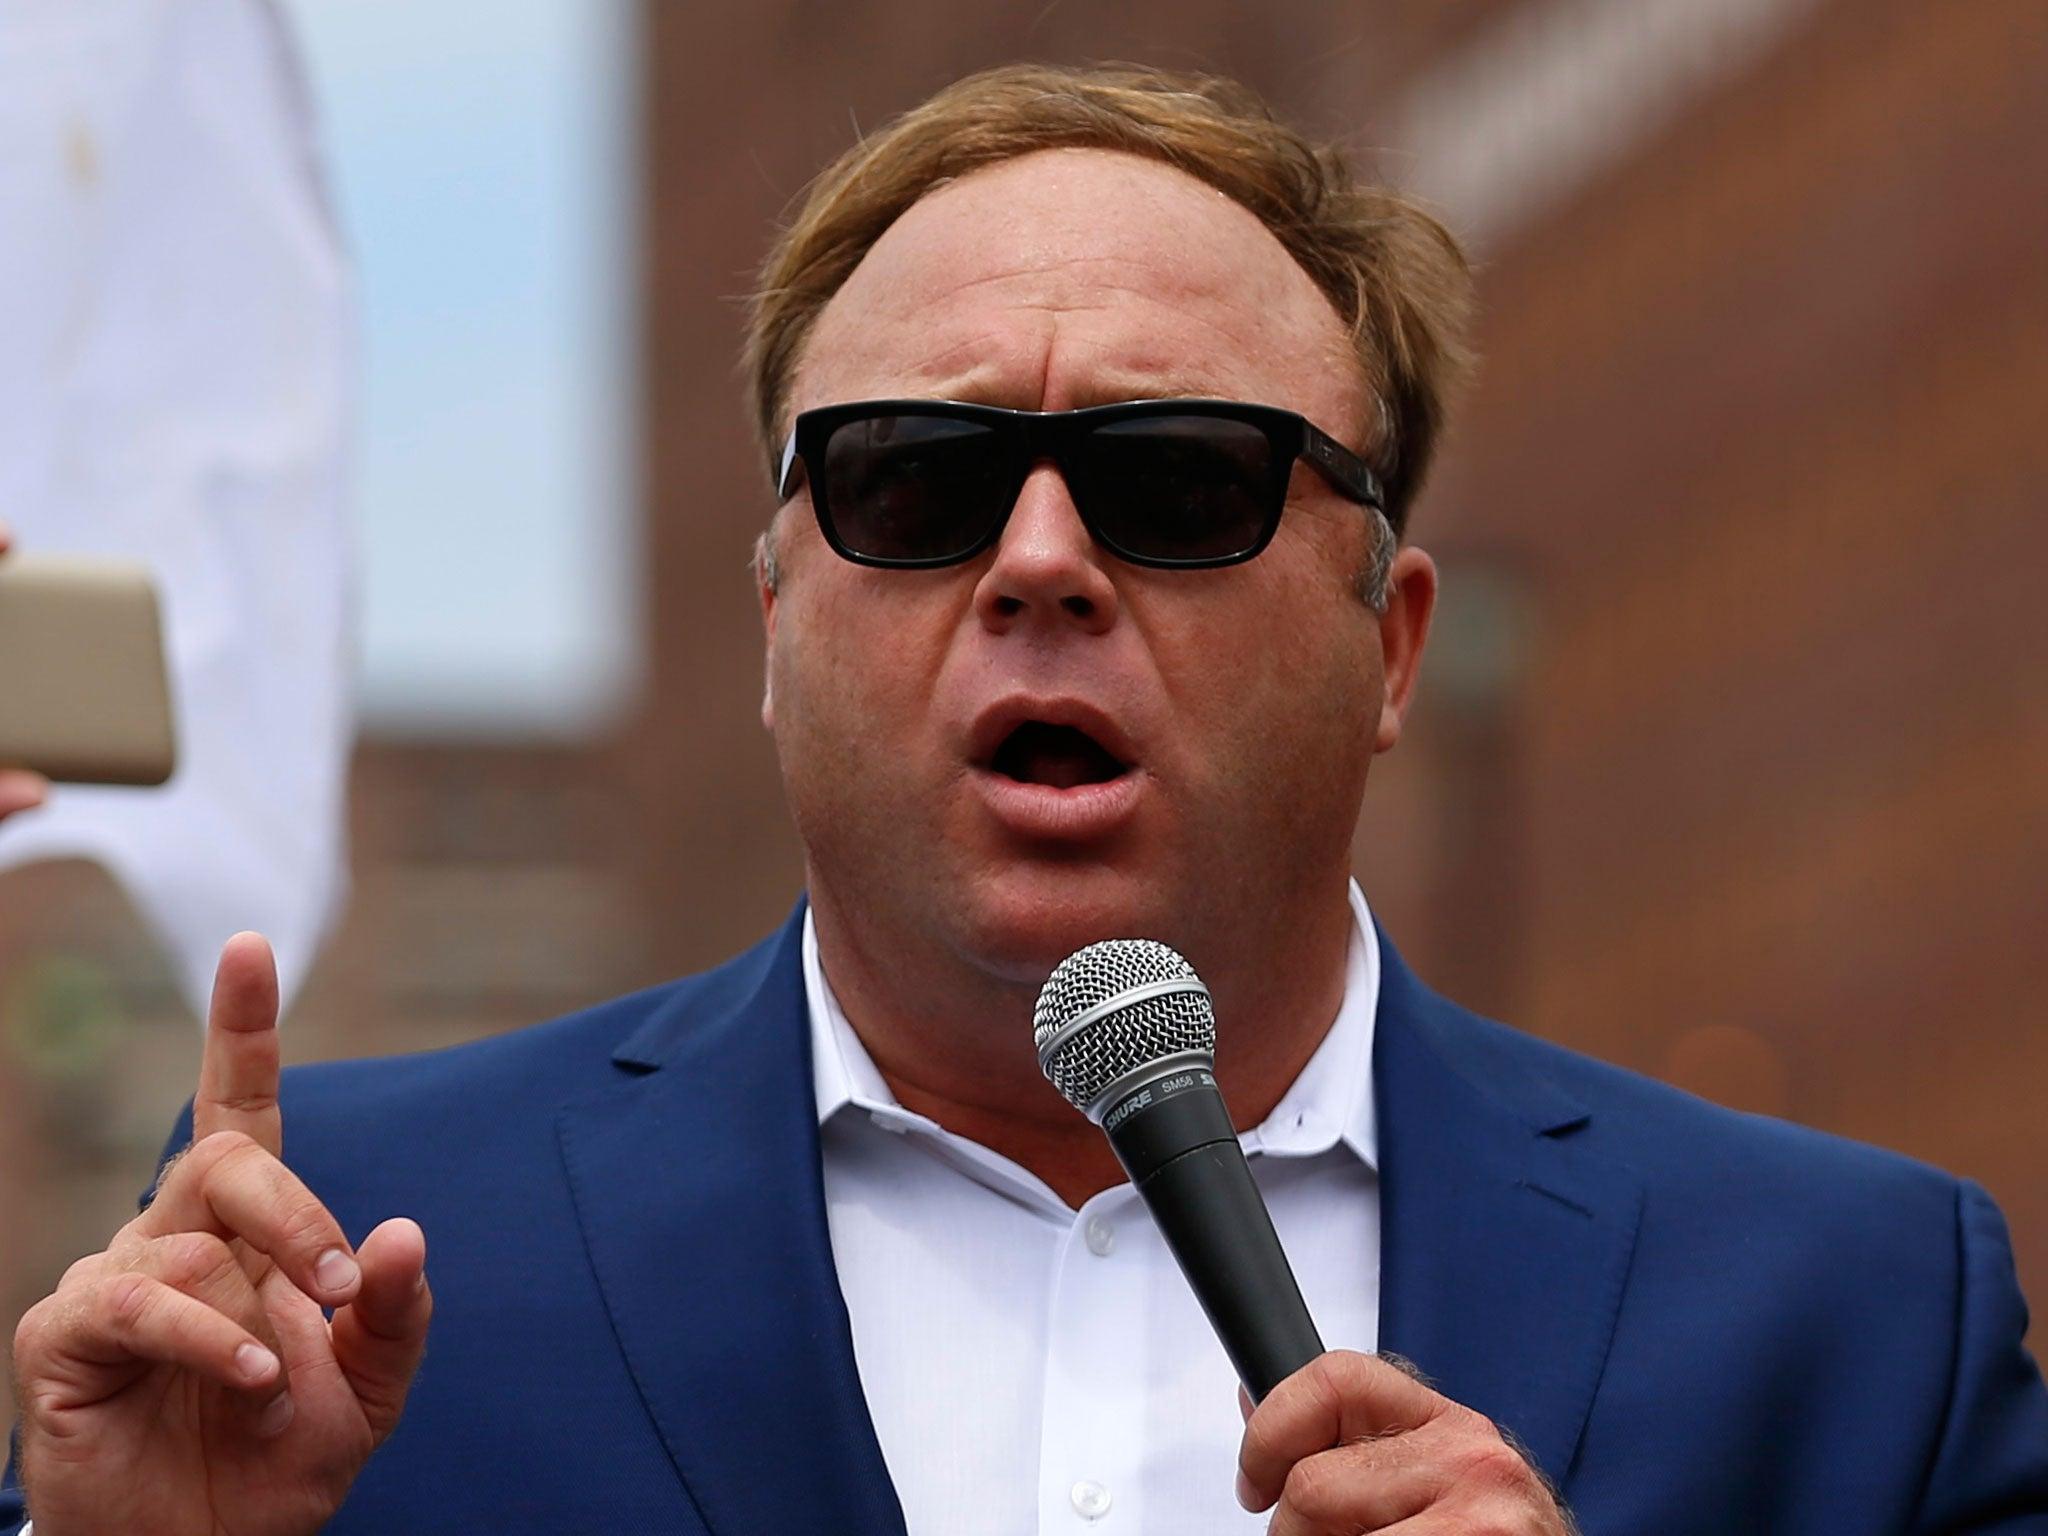 Alex Jones spotted with transgender pornography on phone